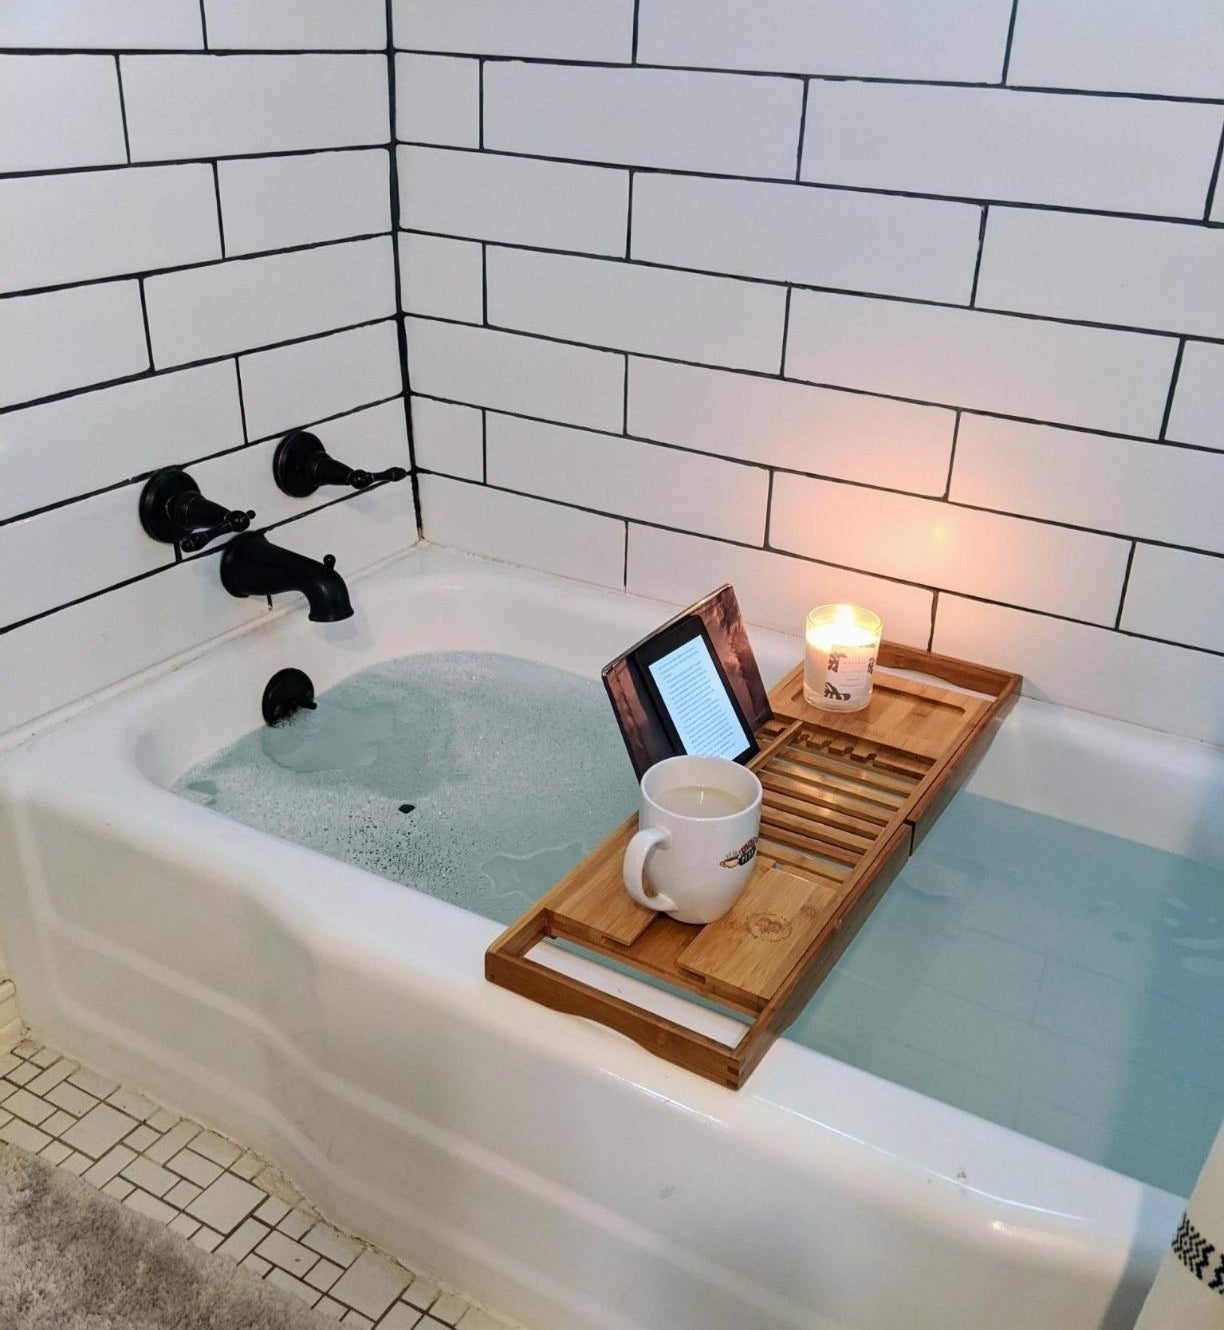 wooden caddy stretched over a tub holding a propped-up kindle, a candle, and a mug